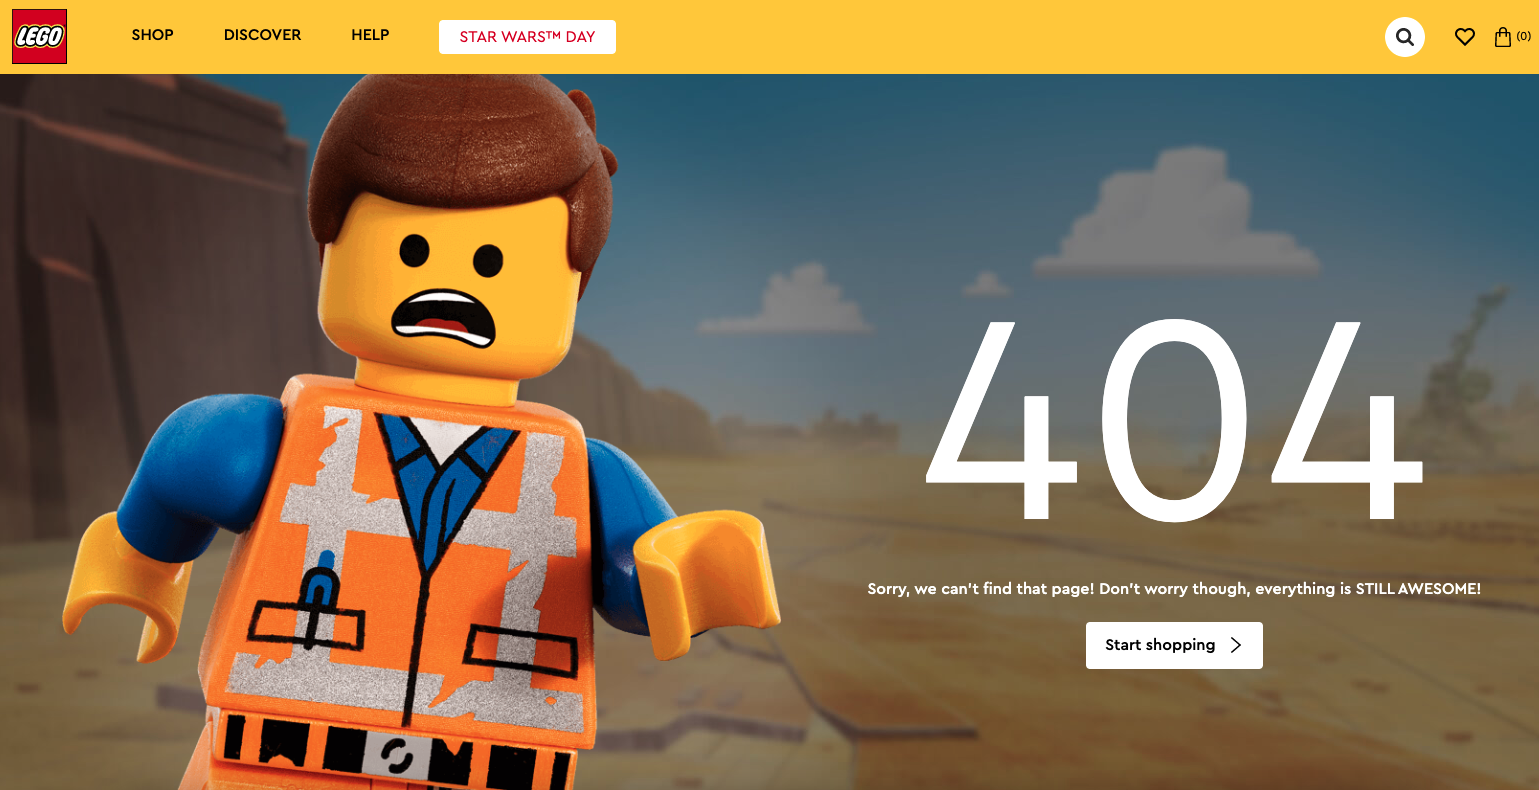 LEGO 404 Page